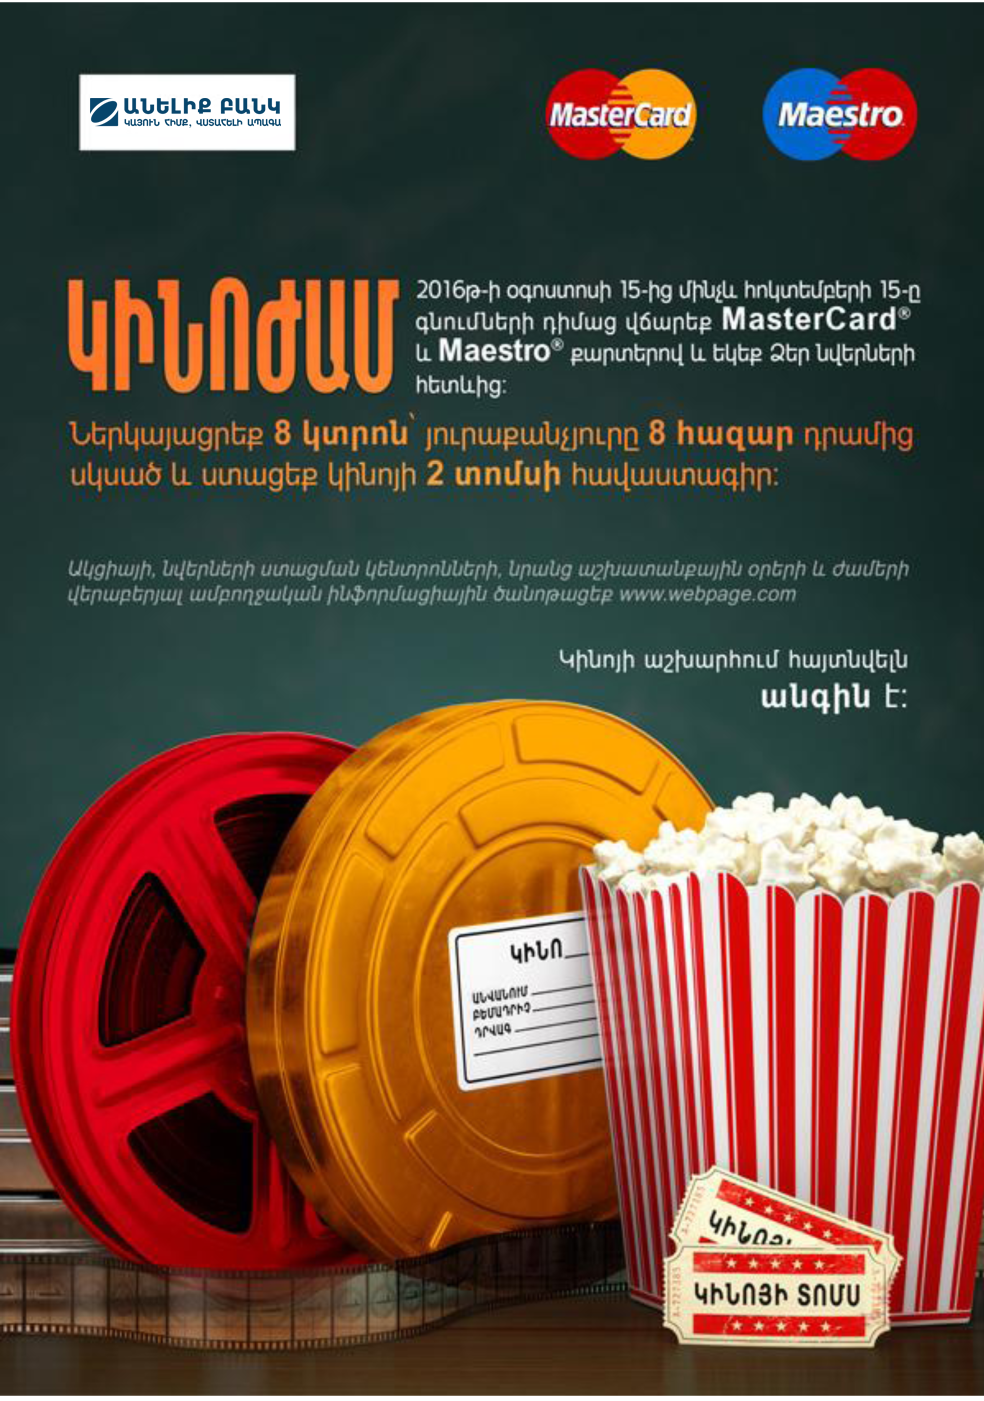 VTB Bank (Armenia) launches "Finding oneself in movie world is  priceless" promo campaign for its MasterCard holders 